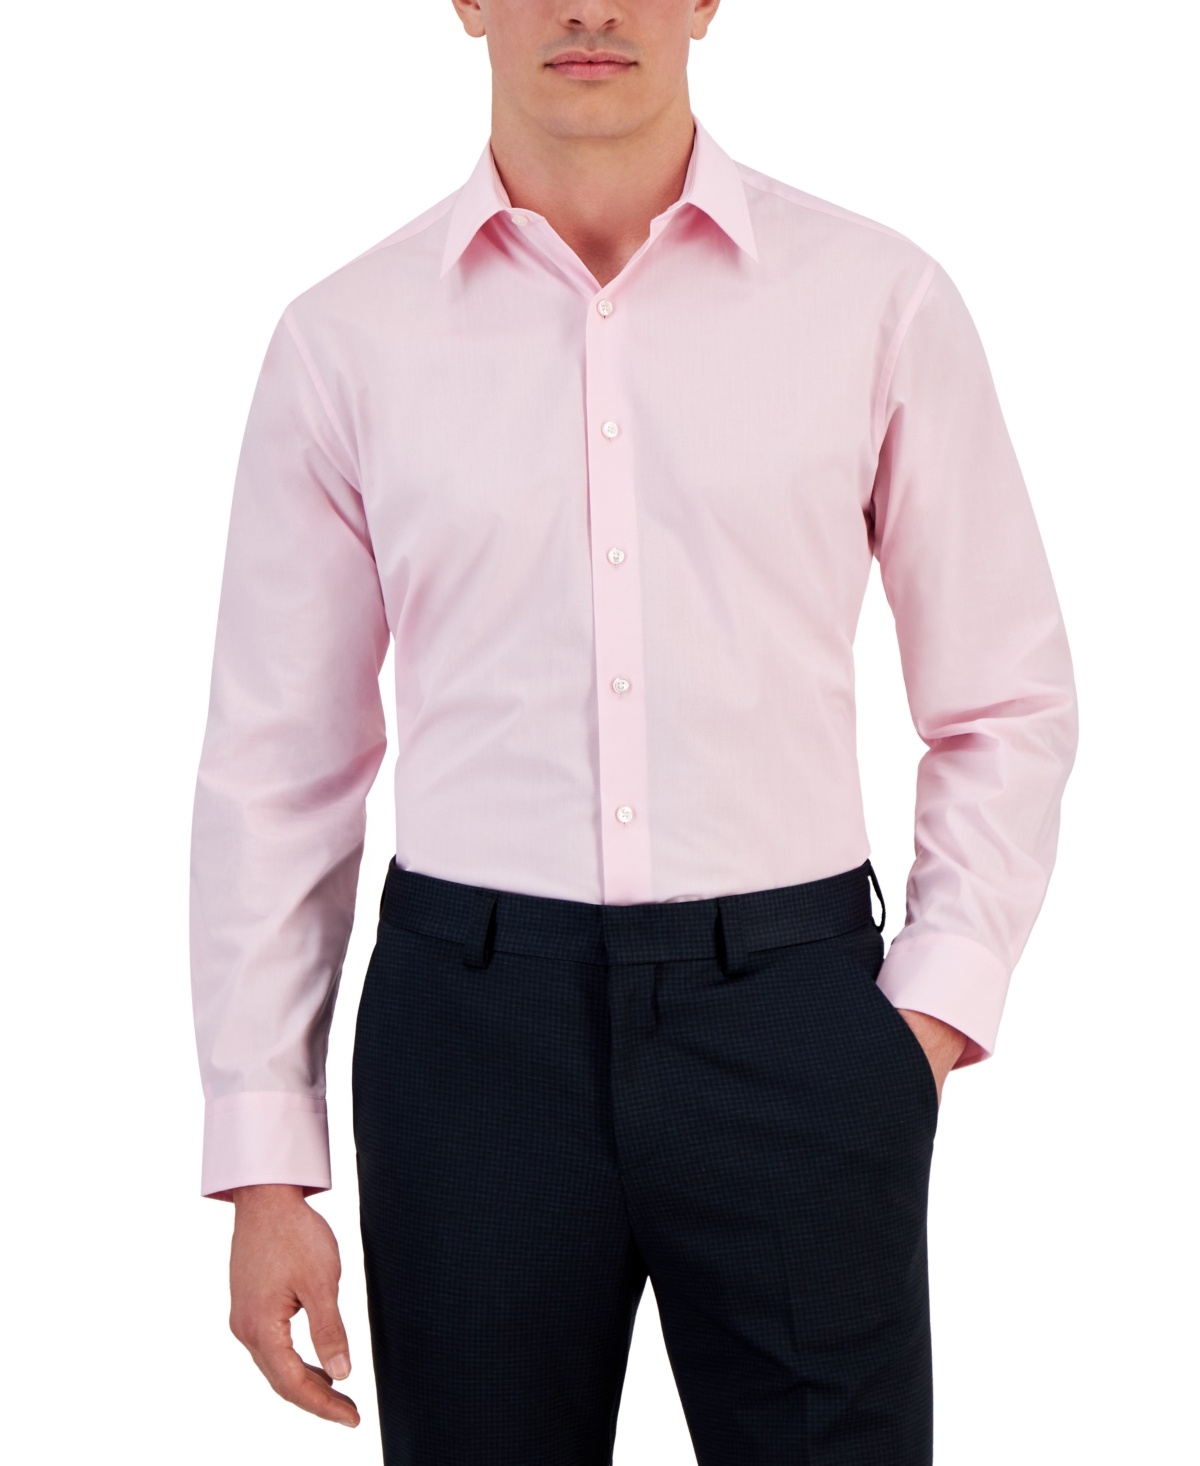 Men's Regular Fit Solid Dress Shirt, Created for Macy's - Parfait Pink